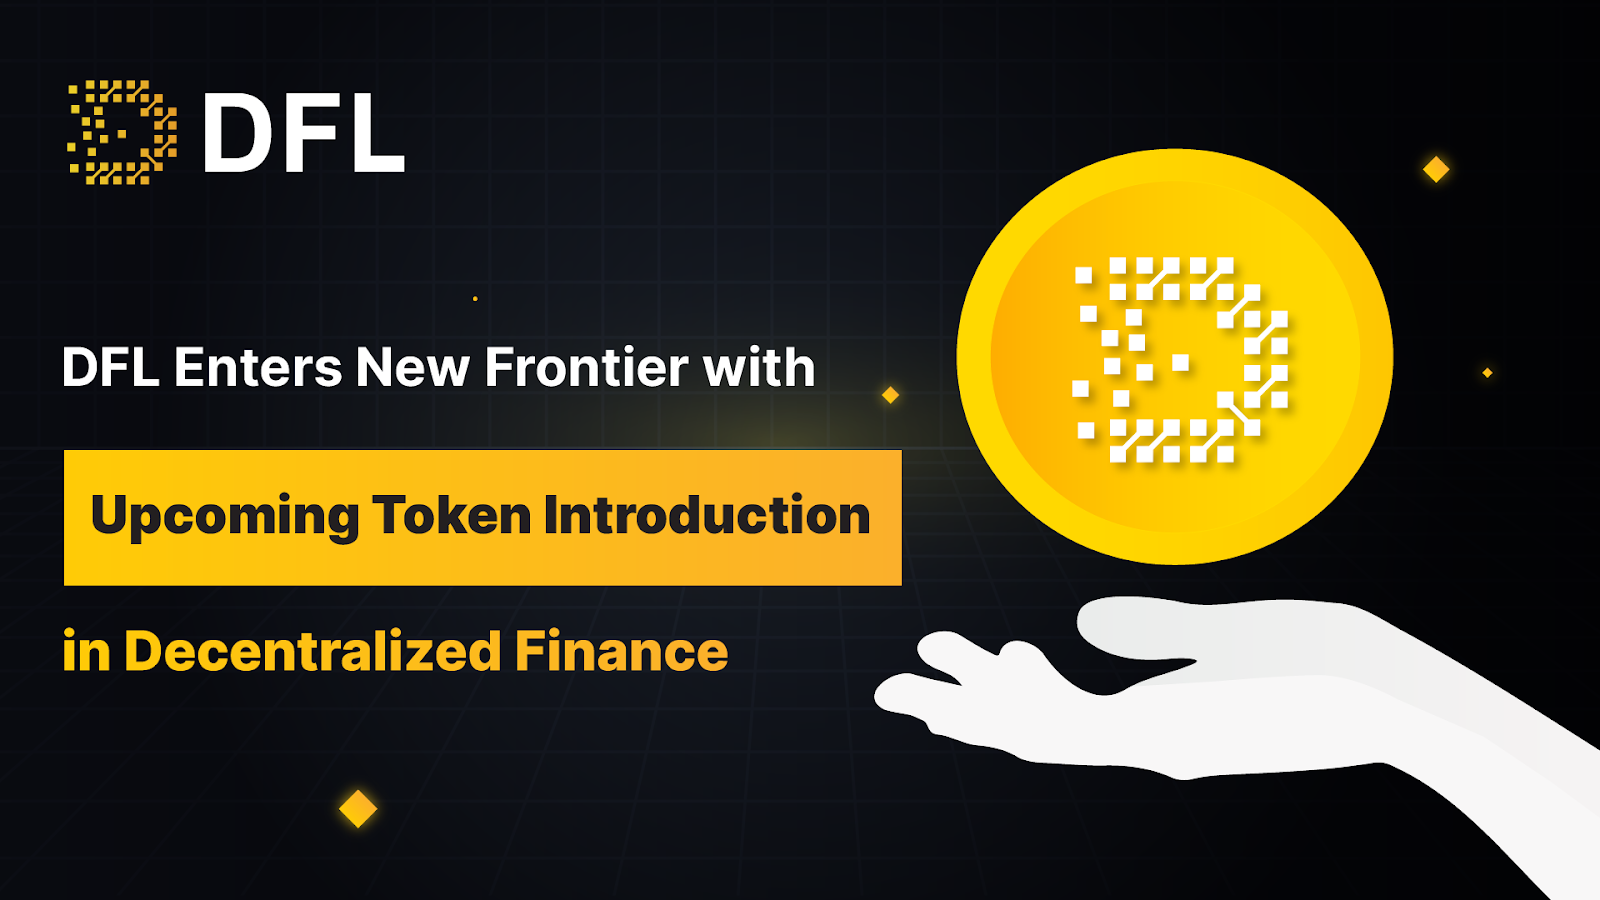 DFL Enters New Frontier with Upcoming Token Introduction in Decentralized Finance